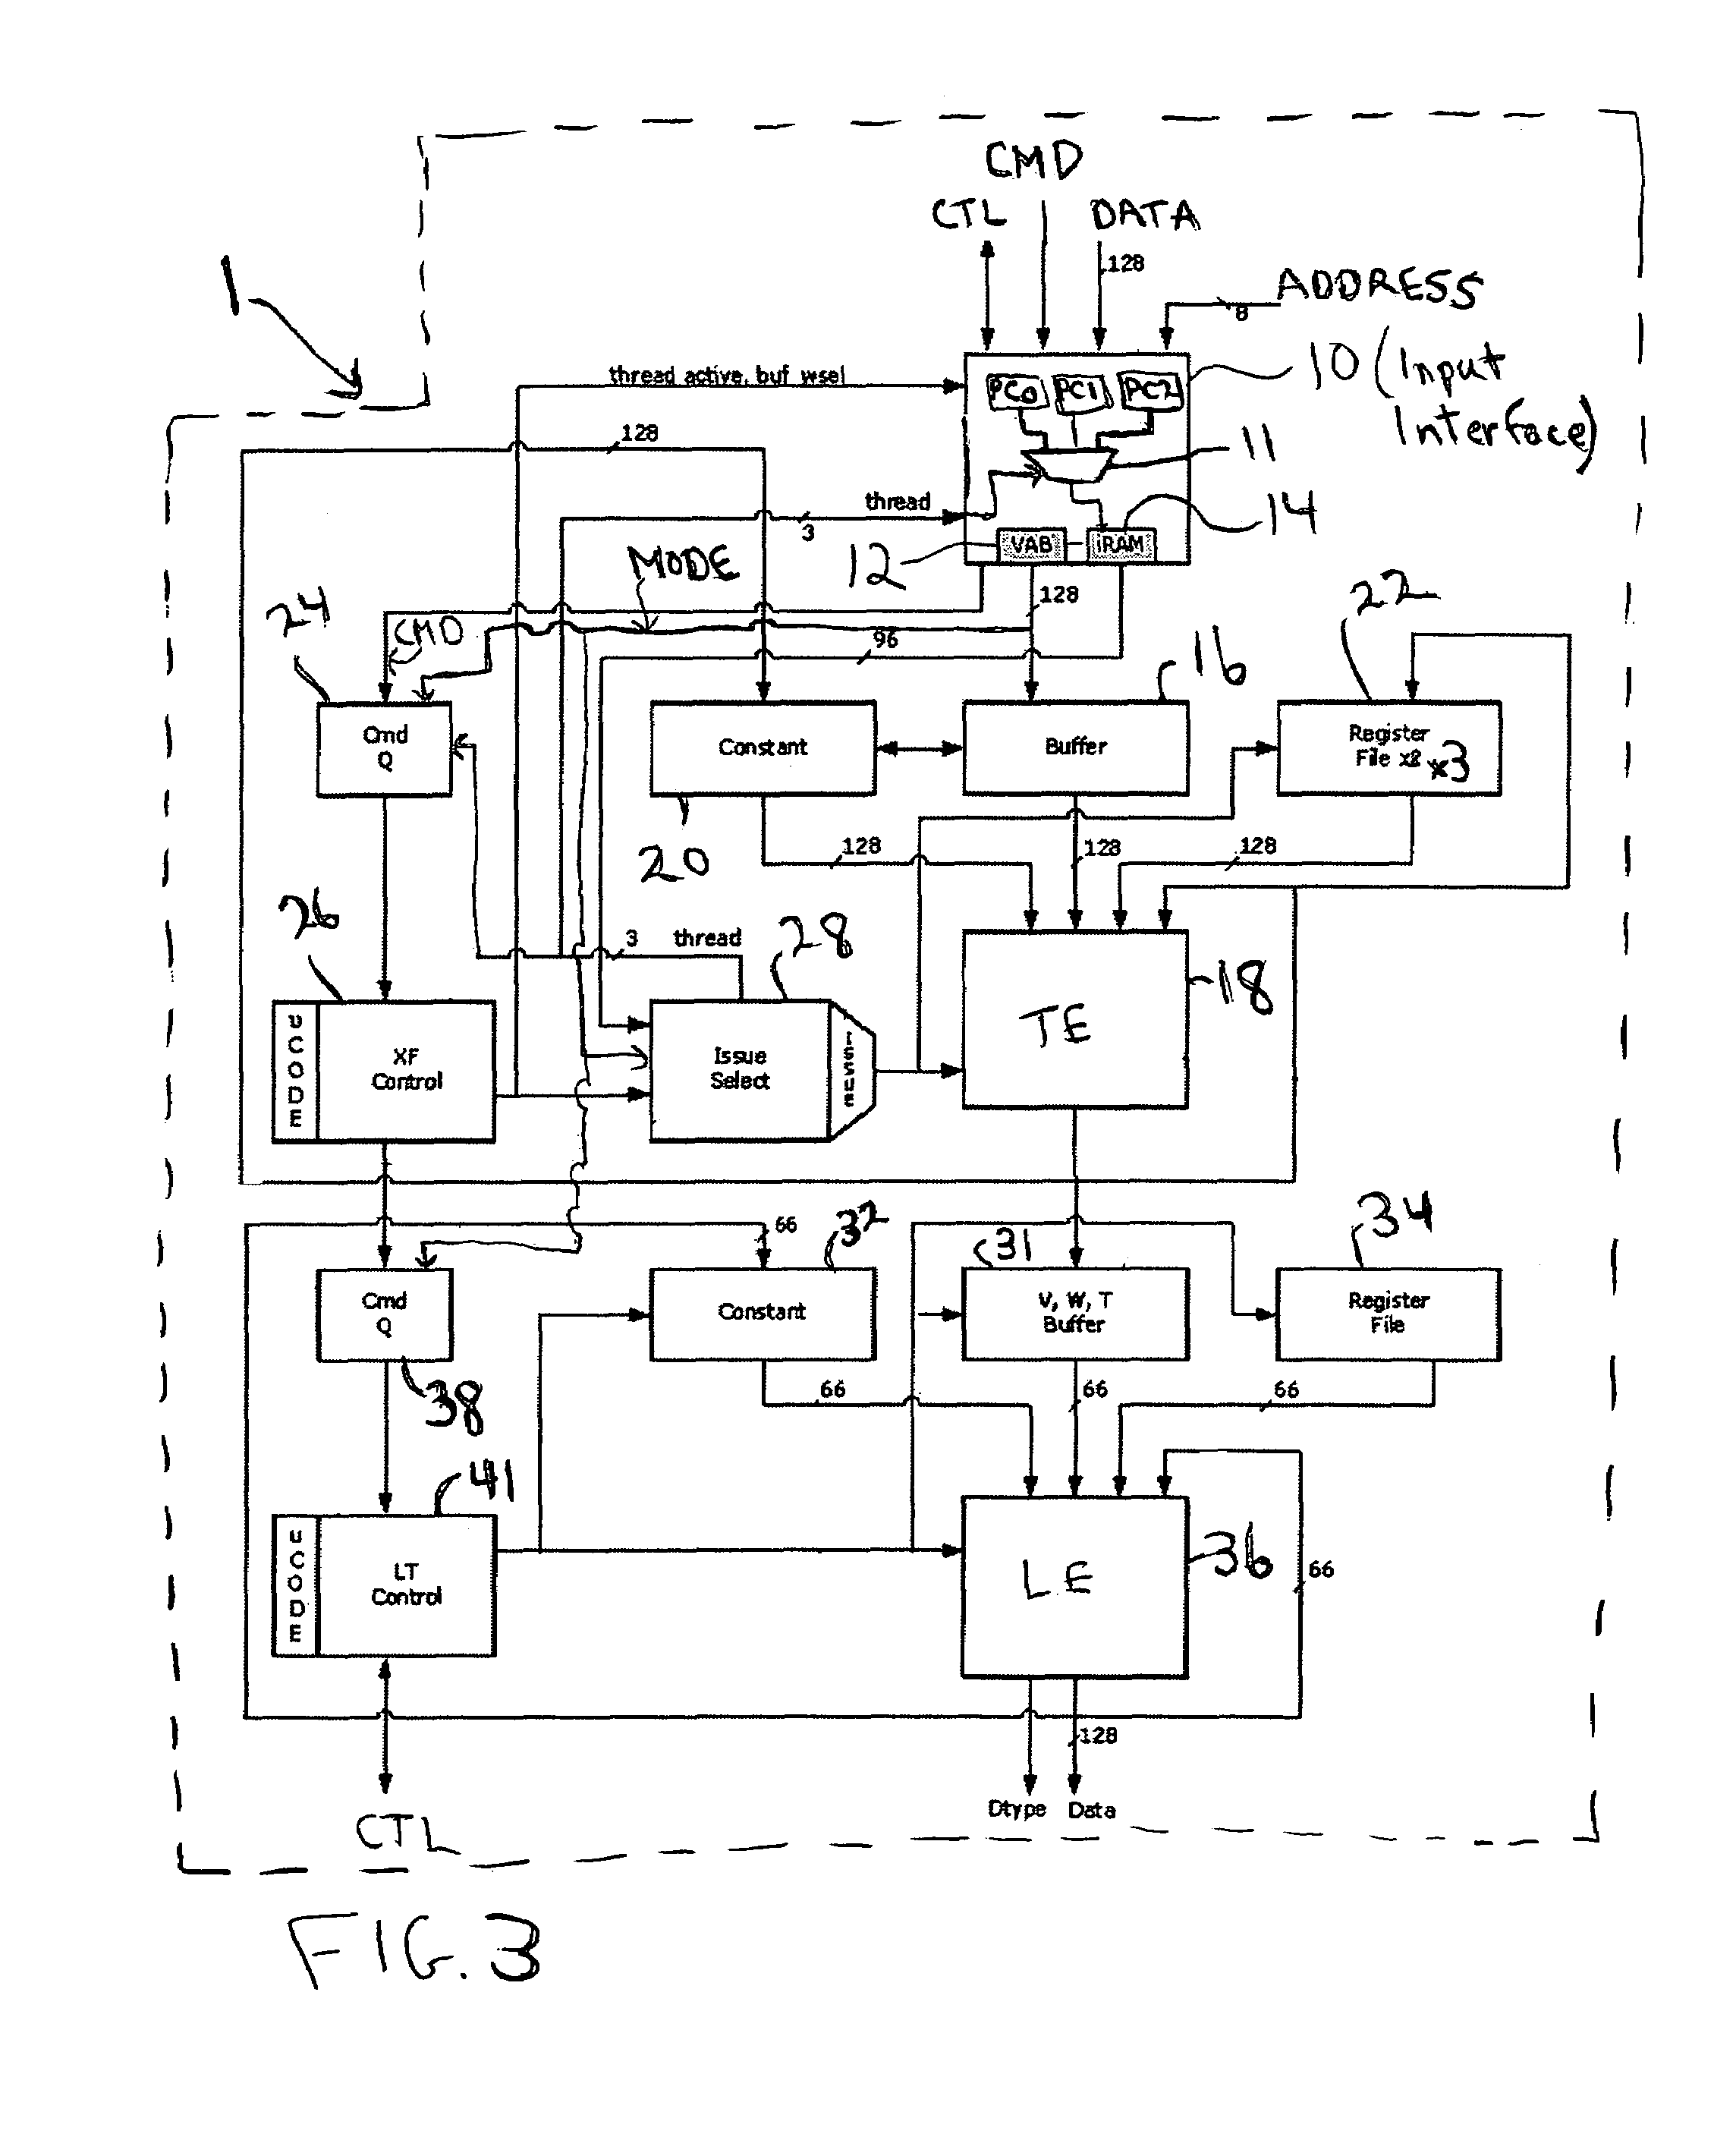 Method and system for programmable pipelined graphics processing with branching instructions